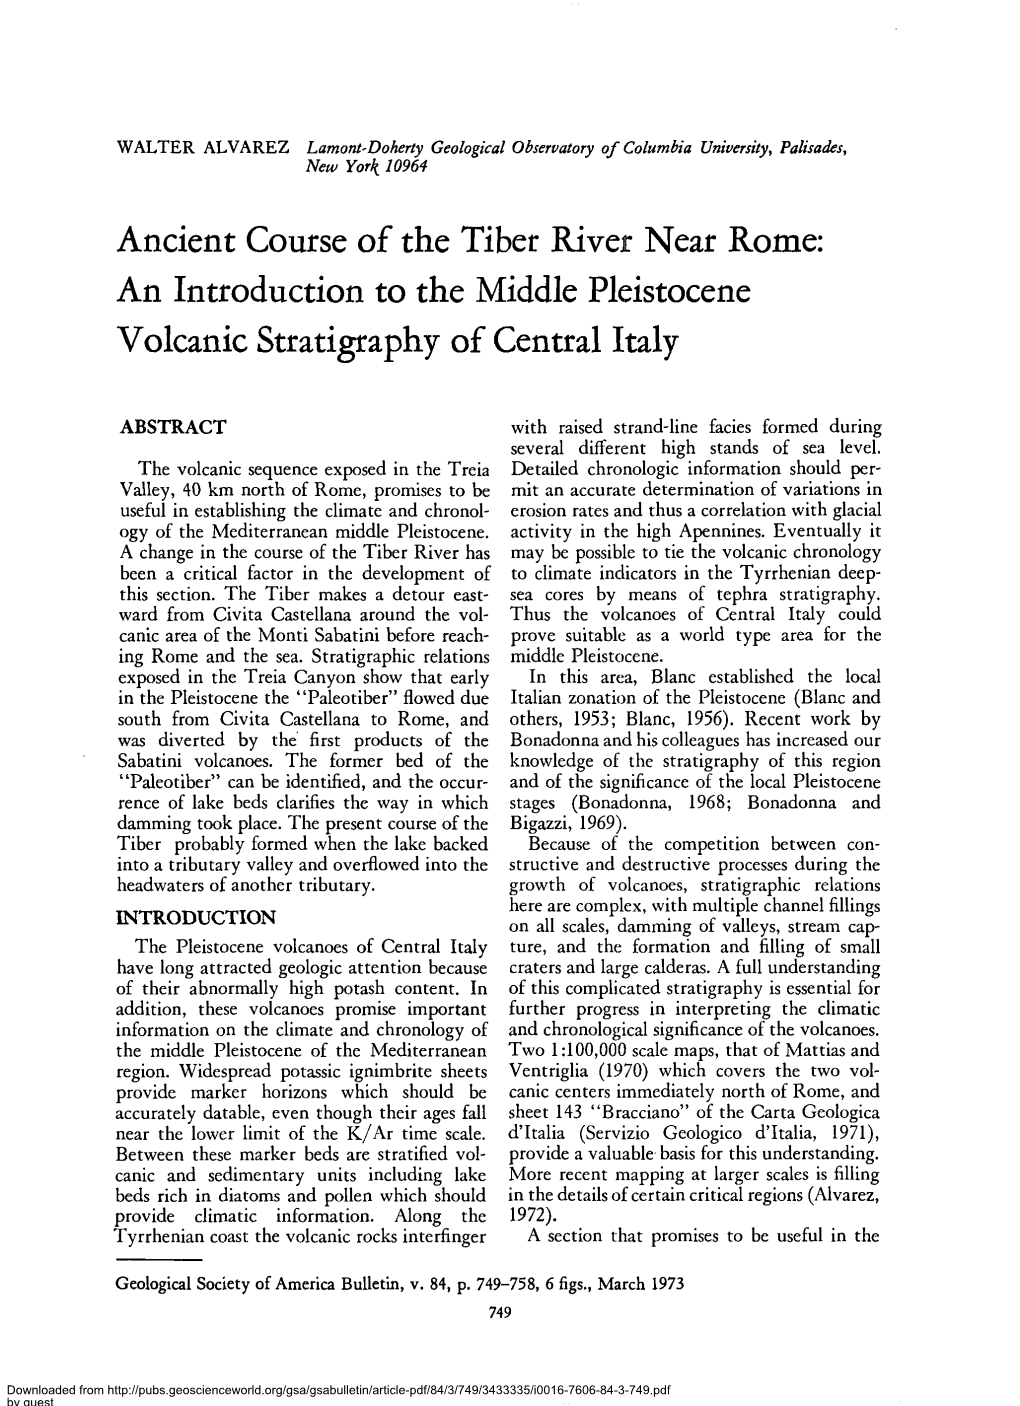 An Introduction to the Middle Pleistocene Volcanic Stratigraphy of Central Italy